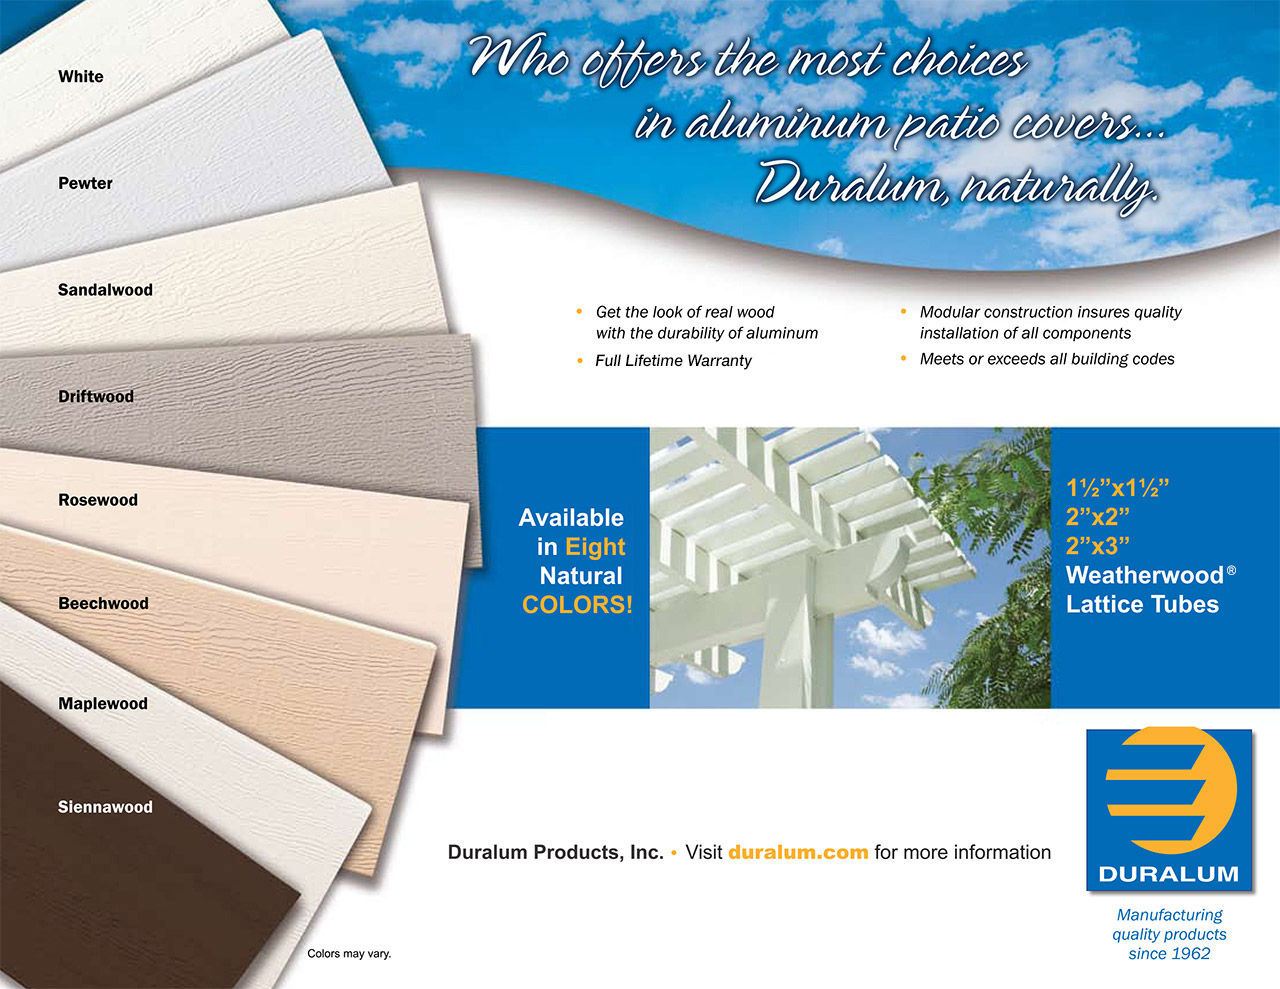 Duralum Rafter Tails Colors - The most choices in the industry